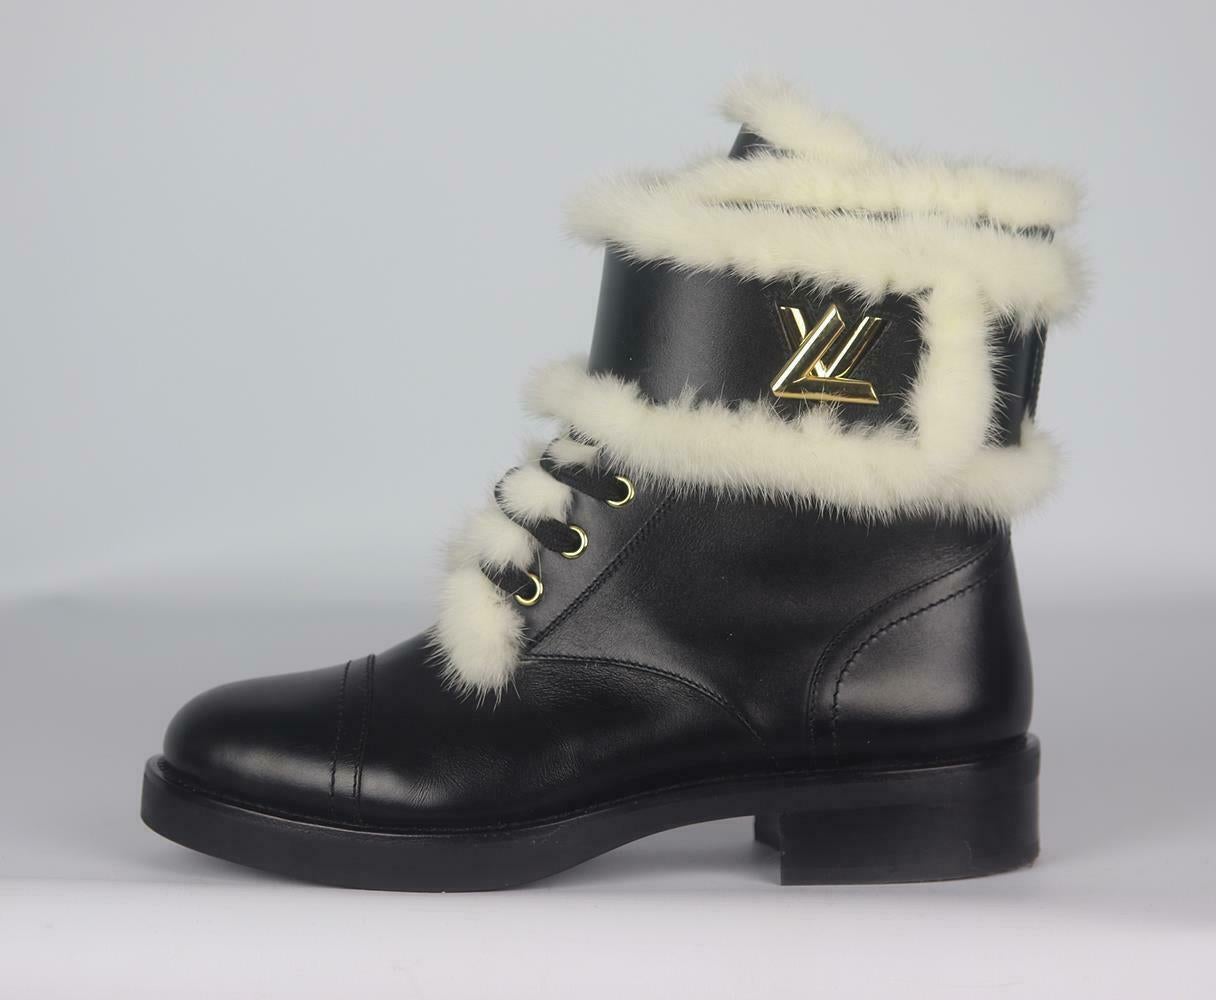 The perfect addition to your chic outfits, Louis Vuitton's 'Wonderland' boots are made from panels of leather and lined in shearling fur, and trimmed in luxurious mink-fur and finished with the LV gold twist lock.
Rubber sole measures approximately